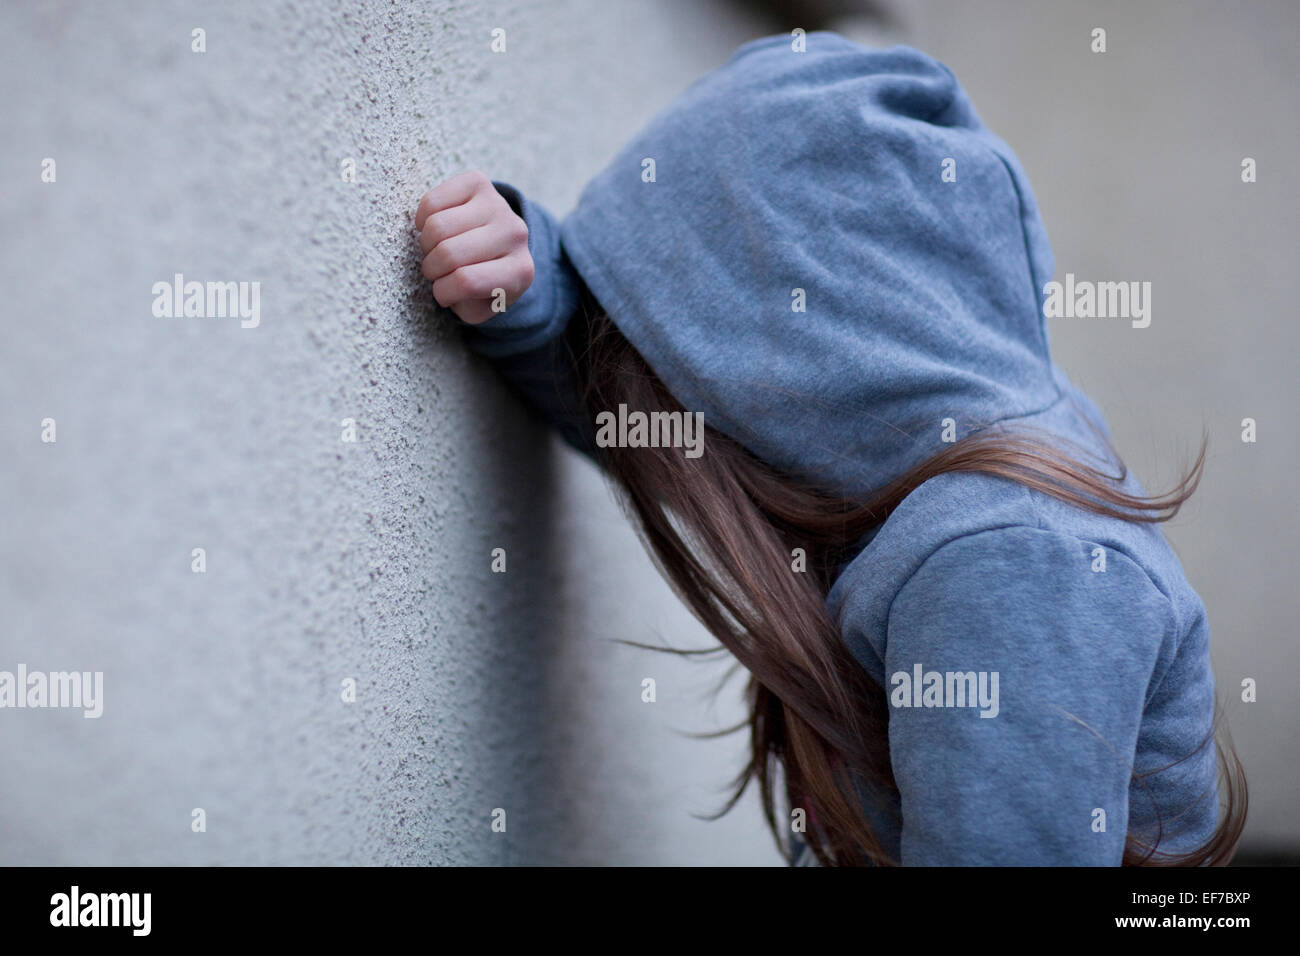 Sad girl in hoodie with face hidden, leaning against a wall in ...